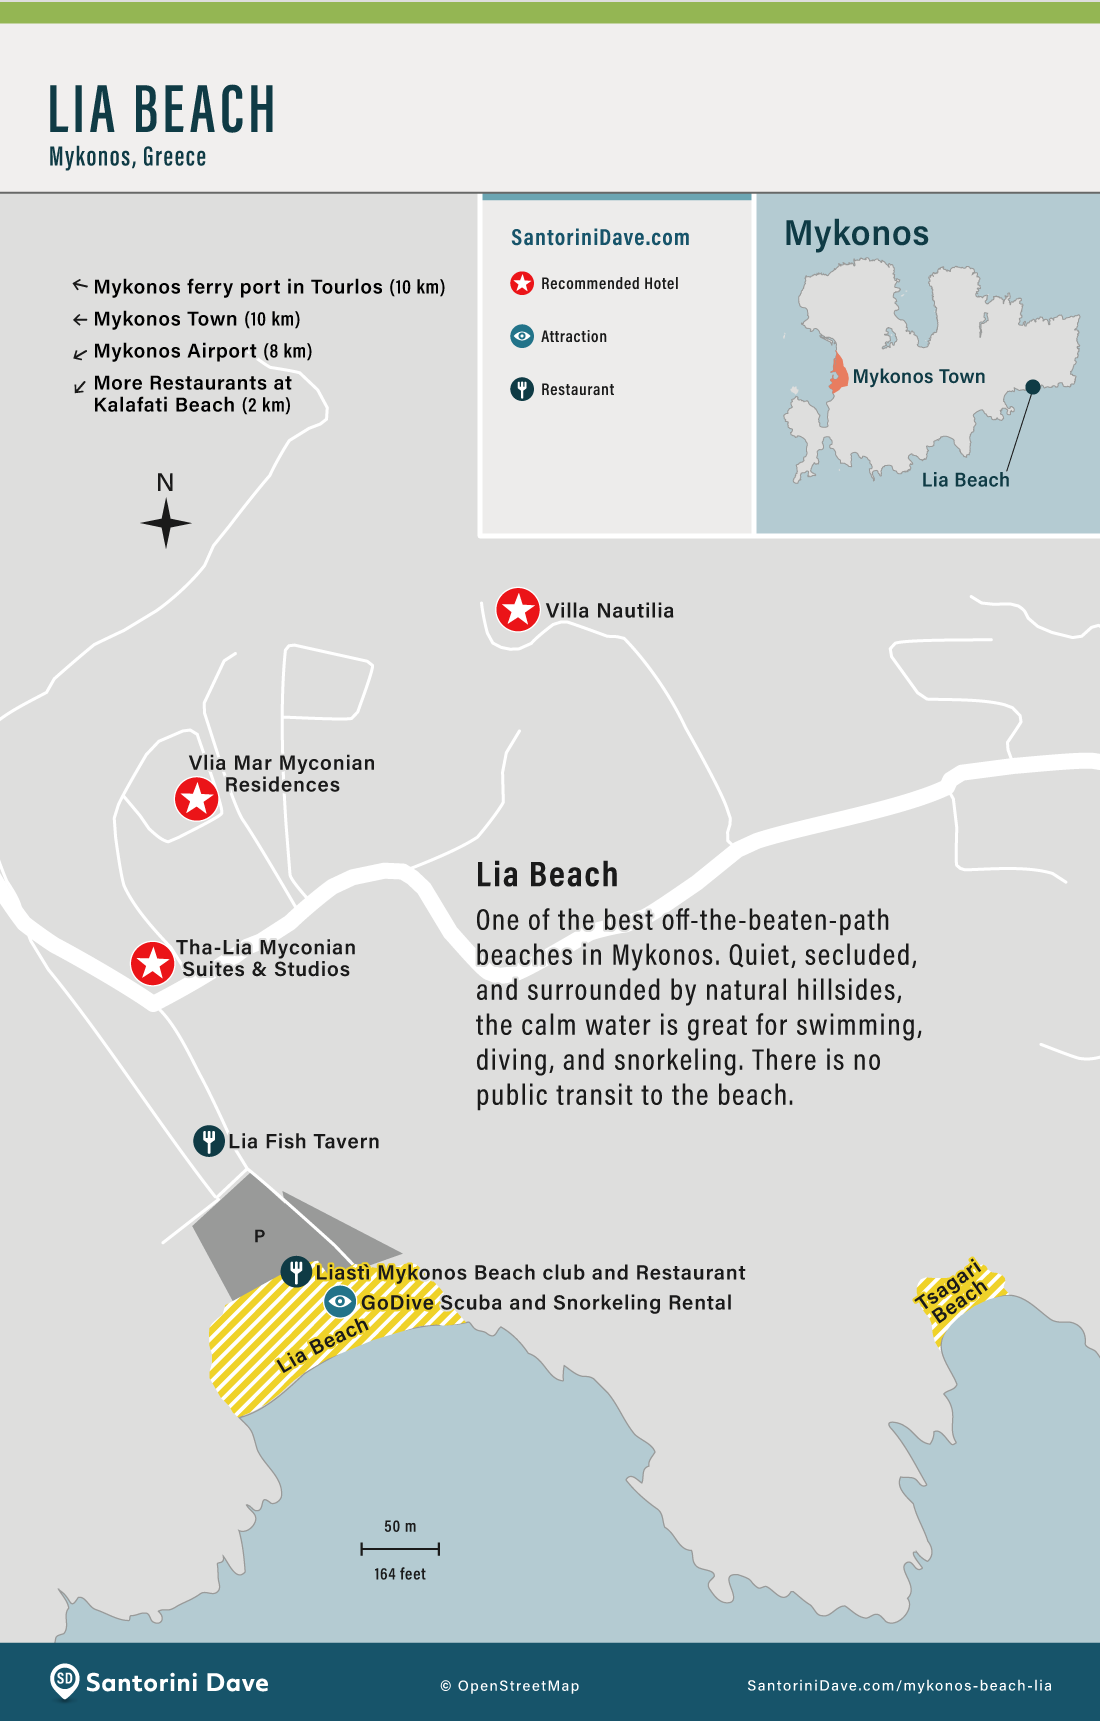 Map of hotels, restaurants, and facilities at Lia Beach in Mykonos, Greece